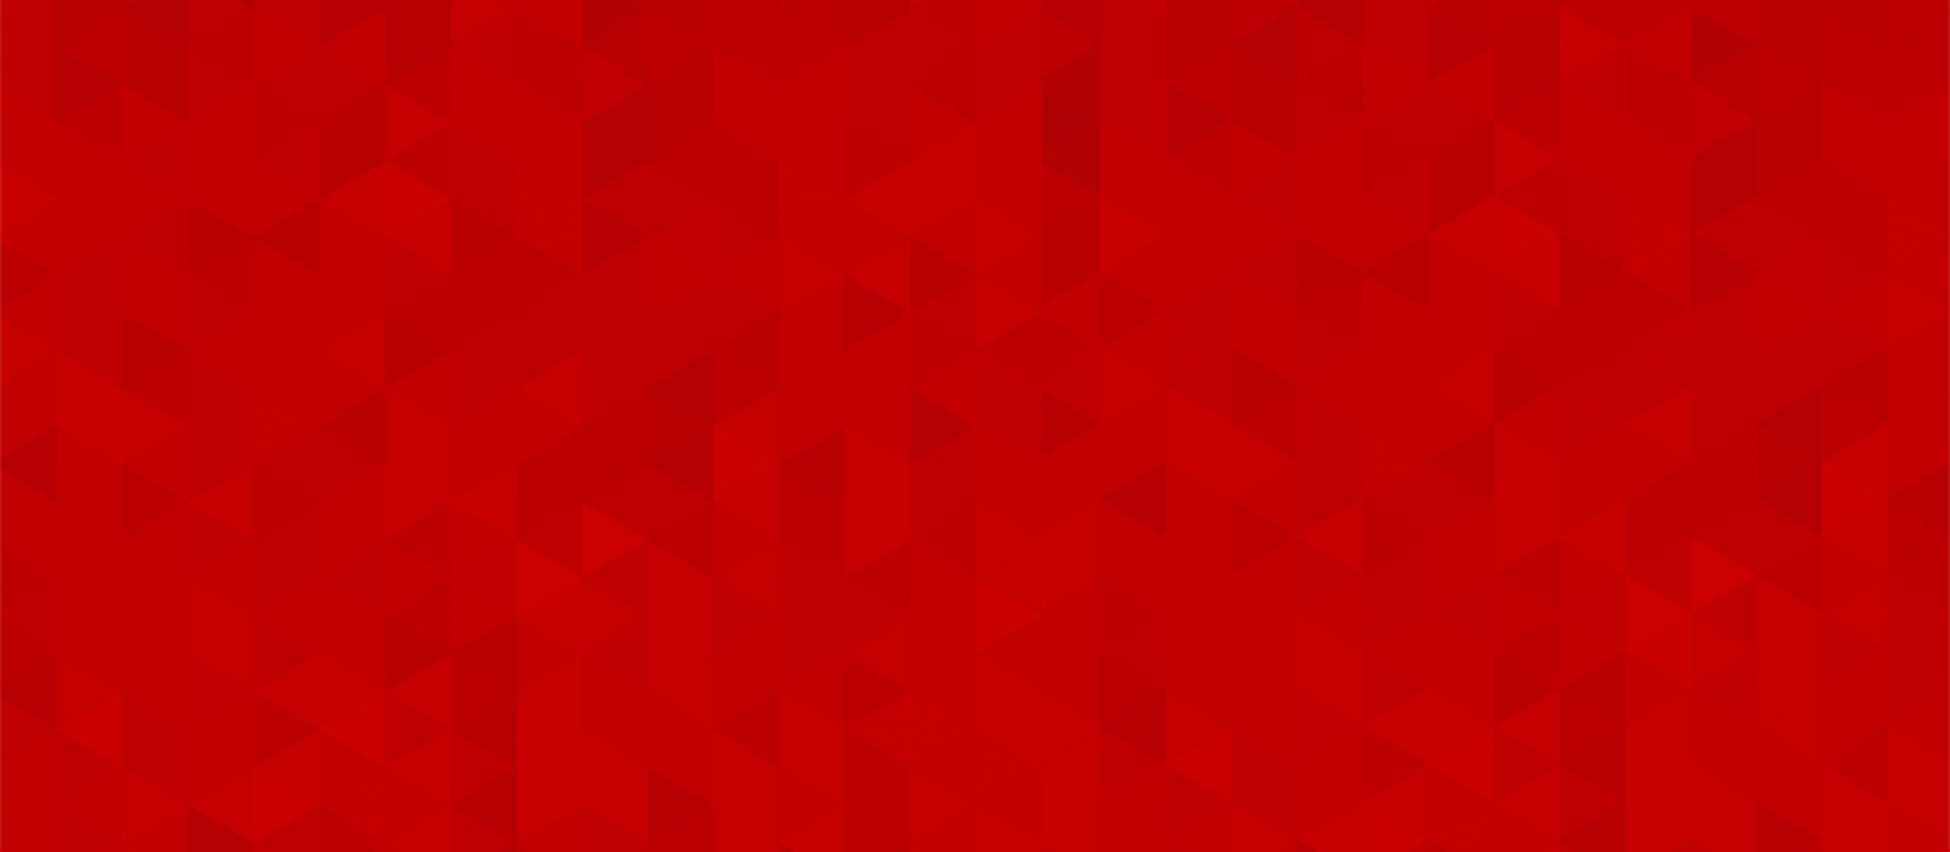 beautiful mixed red free backgrounds